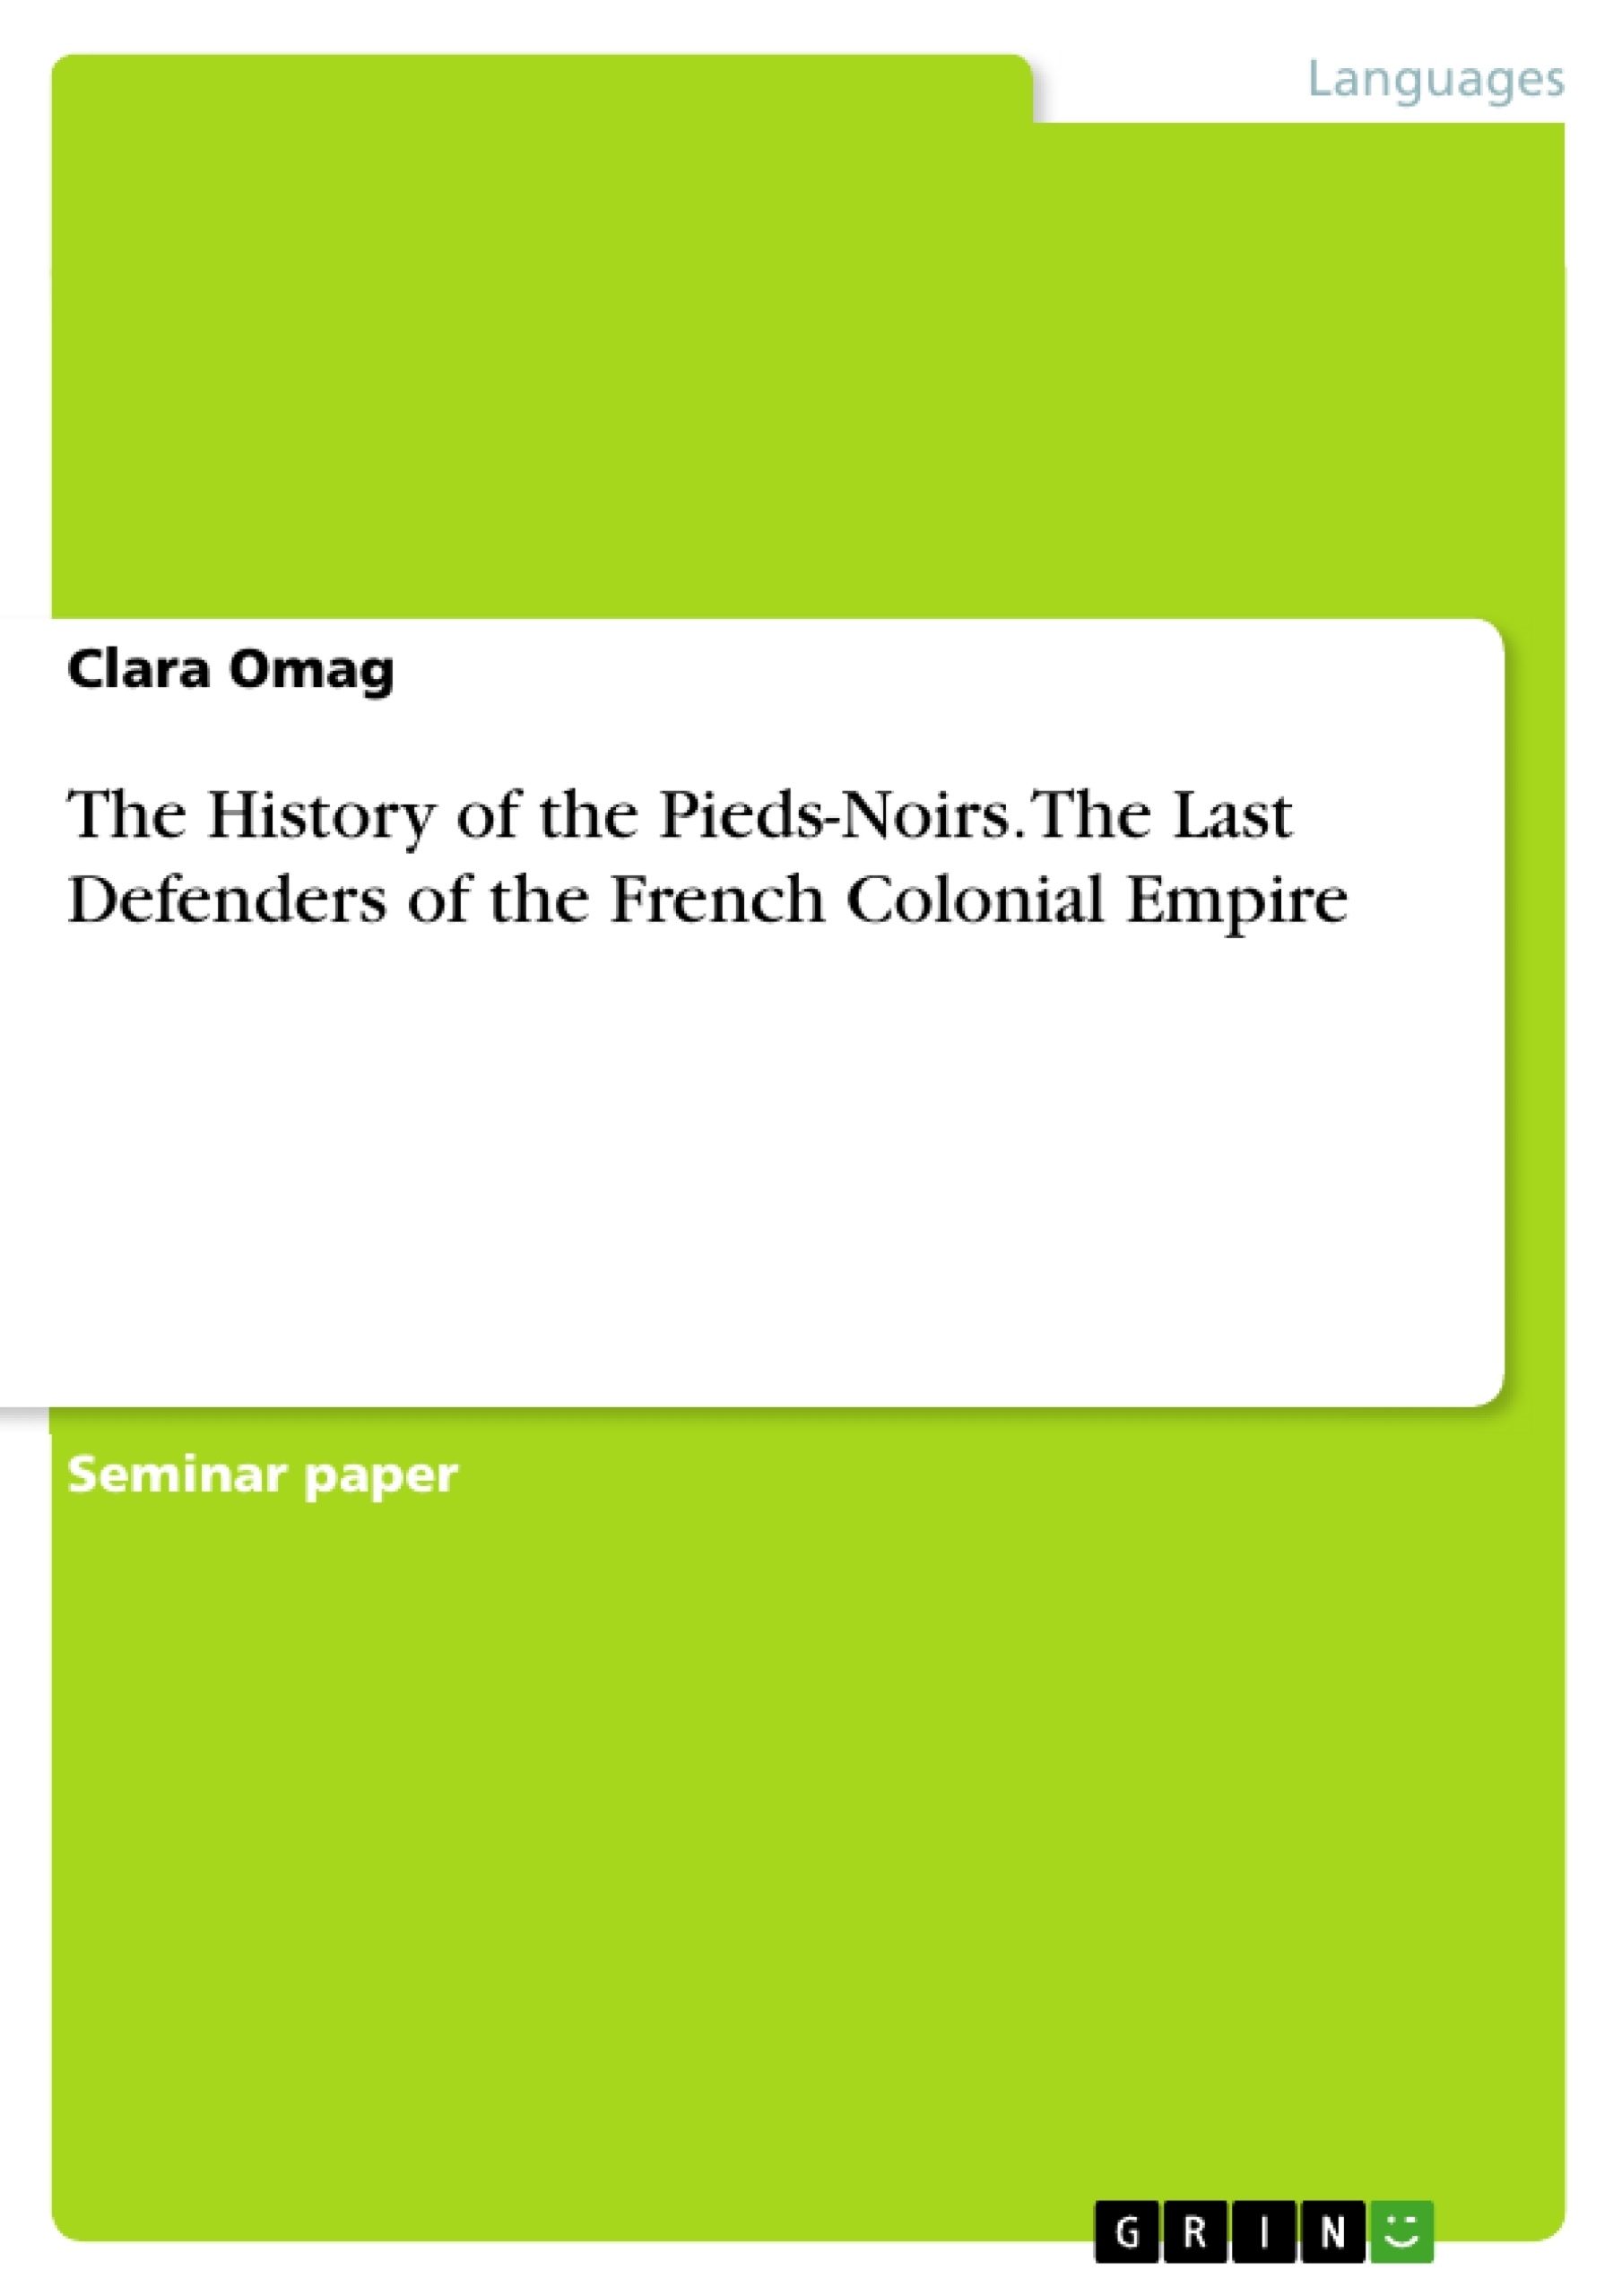 Título: The History of the Pieds-Noirs. The Last Defenders of the French Colonial Empire